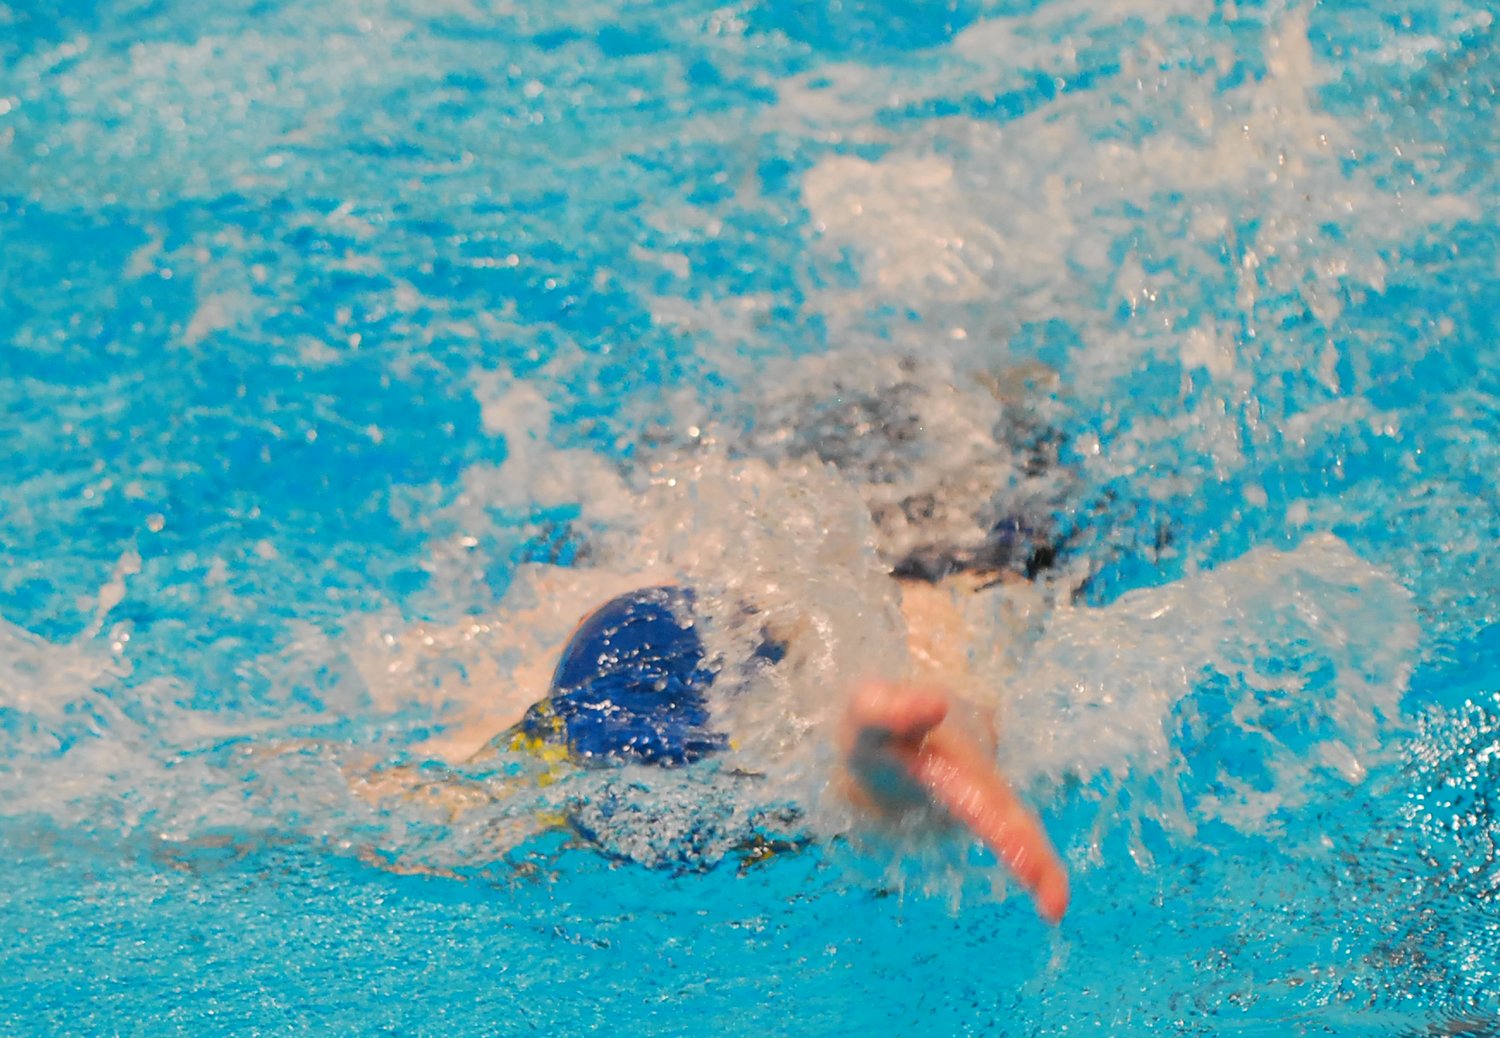 Crawfordsville's Whitman Horton swam to wins the 500 freestyle and 100 backstroke.